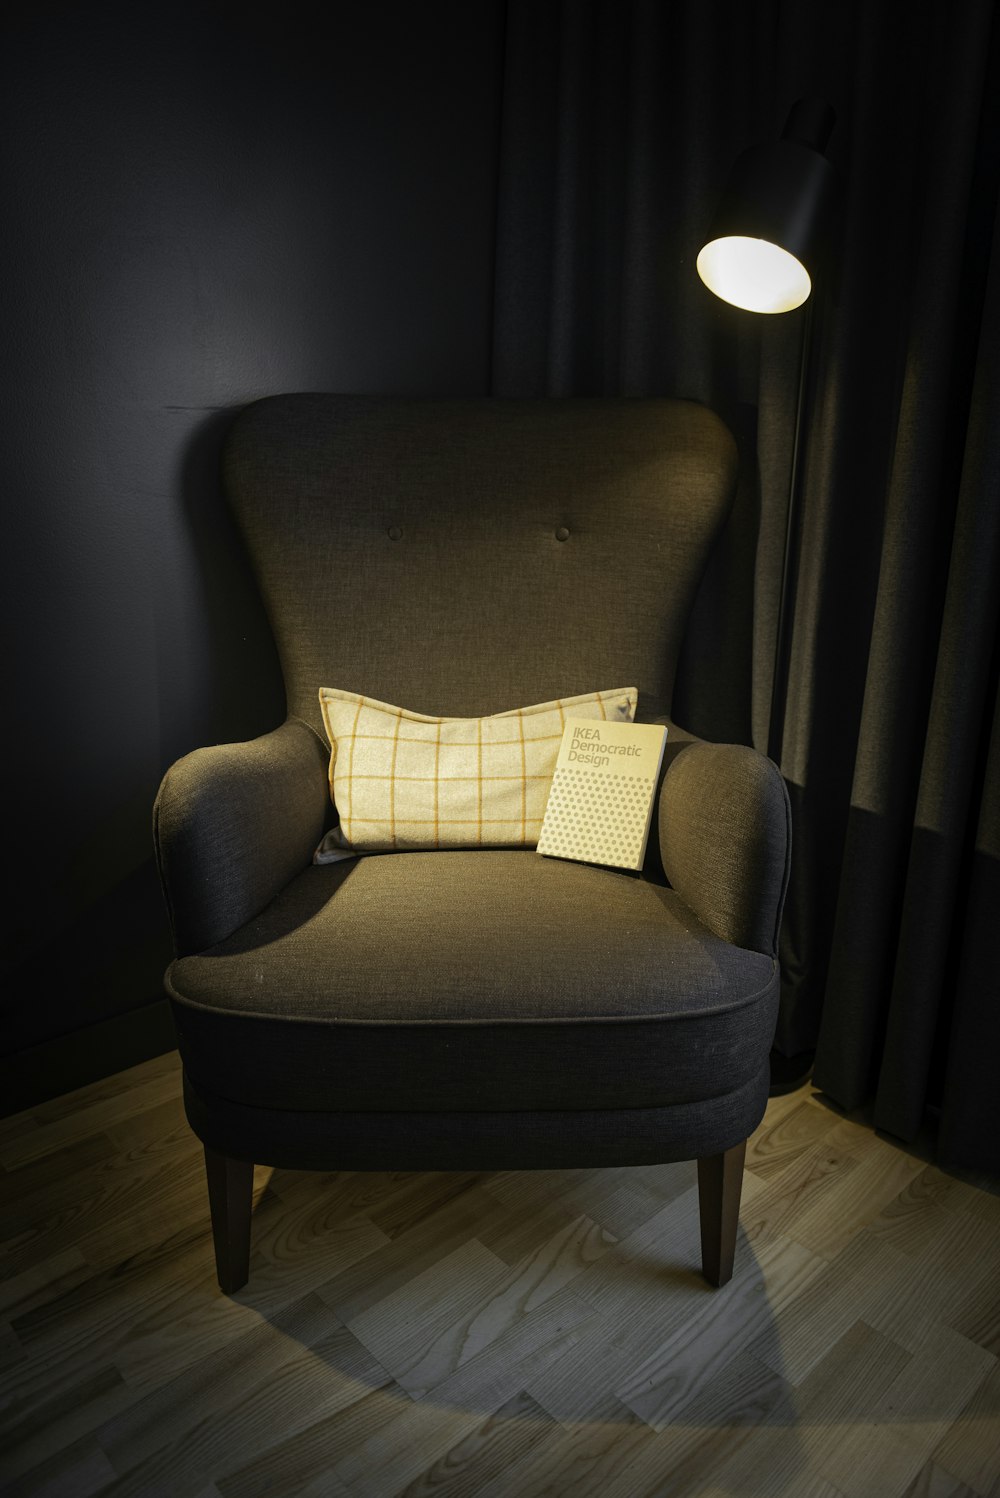 a chair with a pillow on it in a dark room